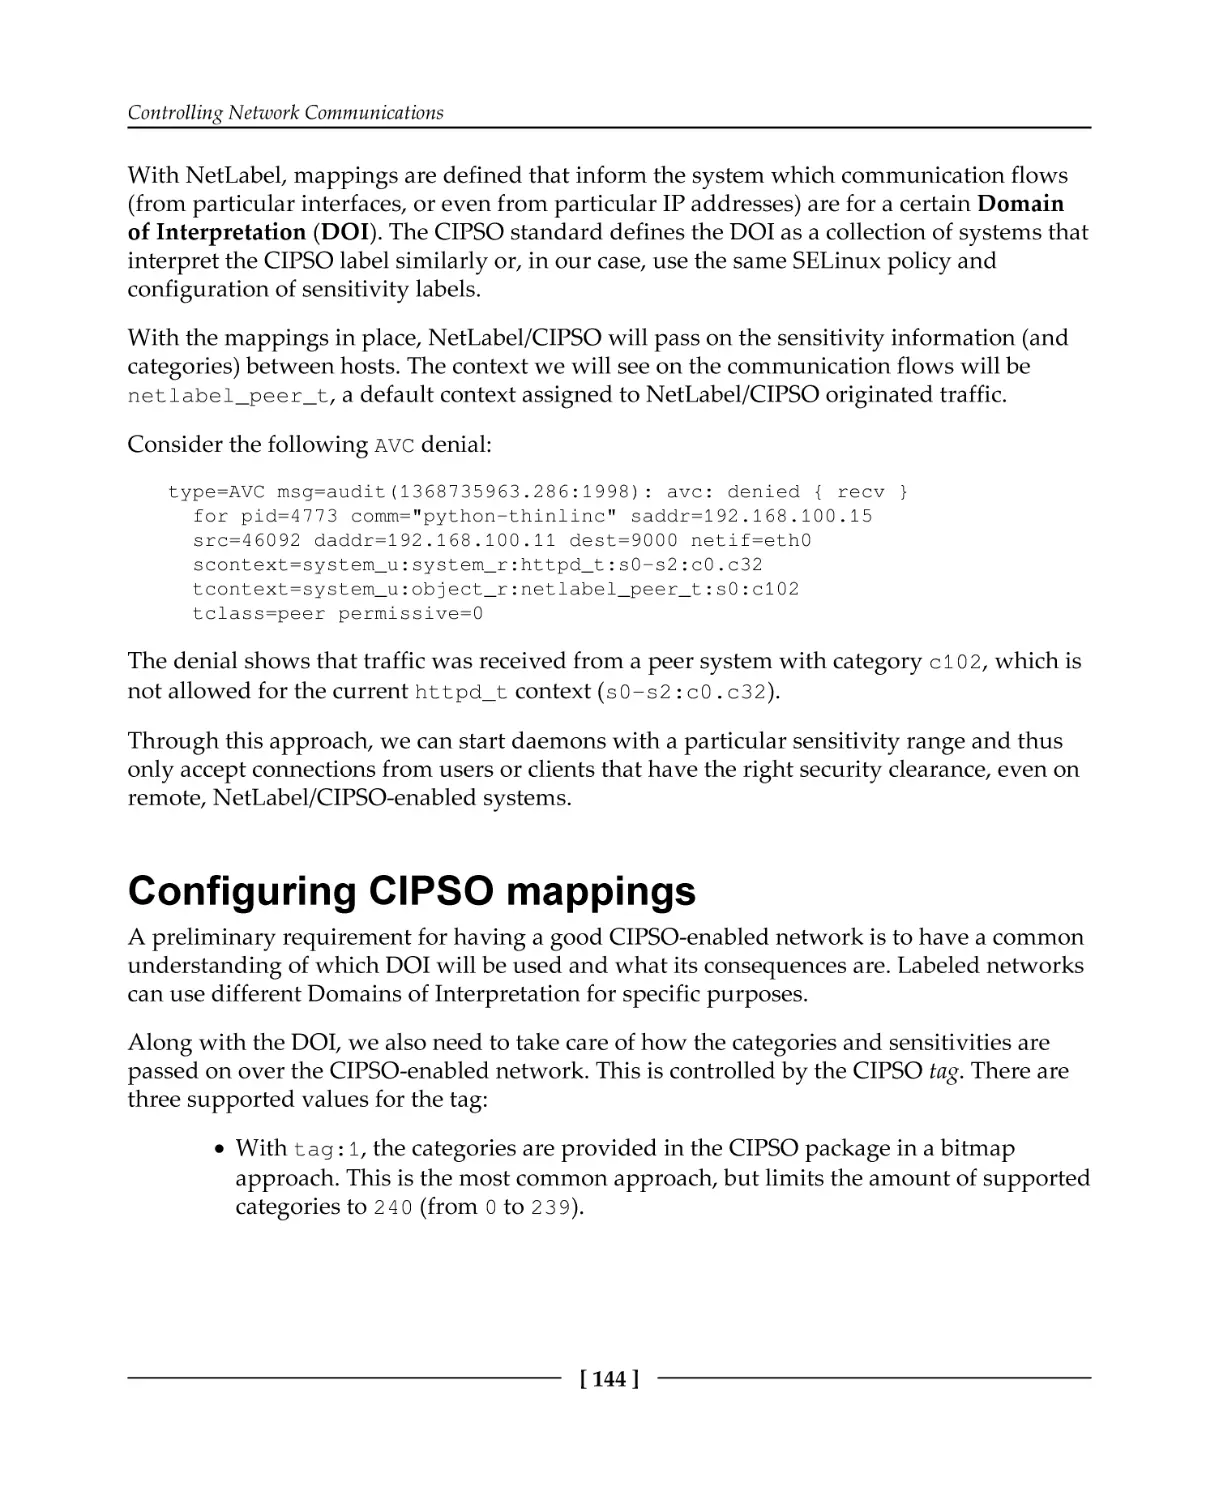 Configuring CIPSO mappings